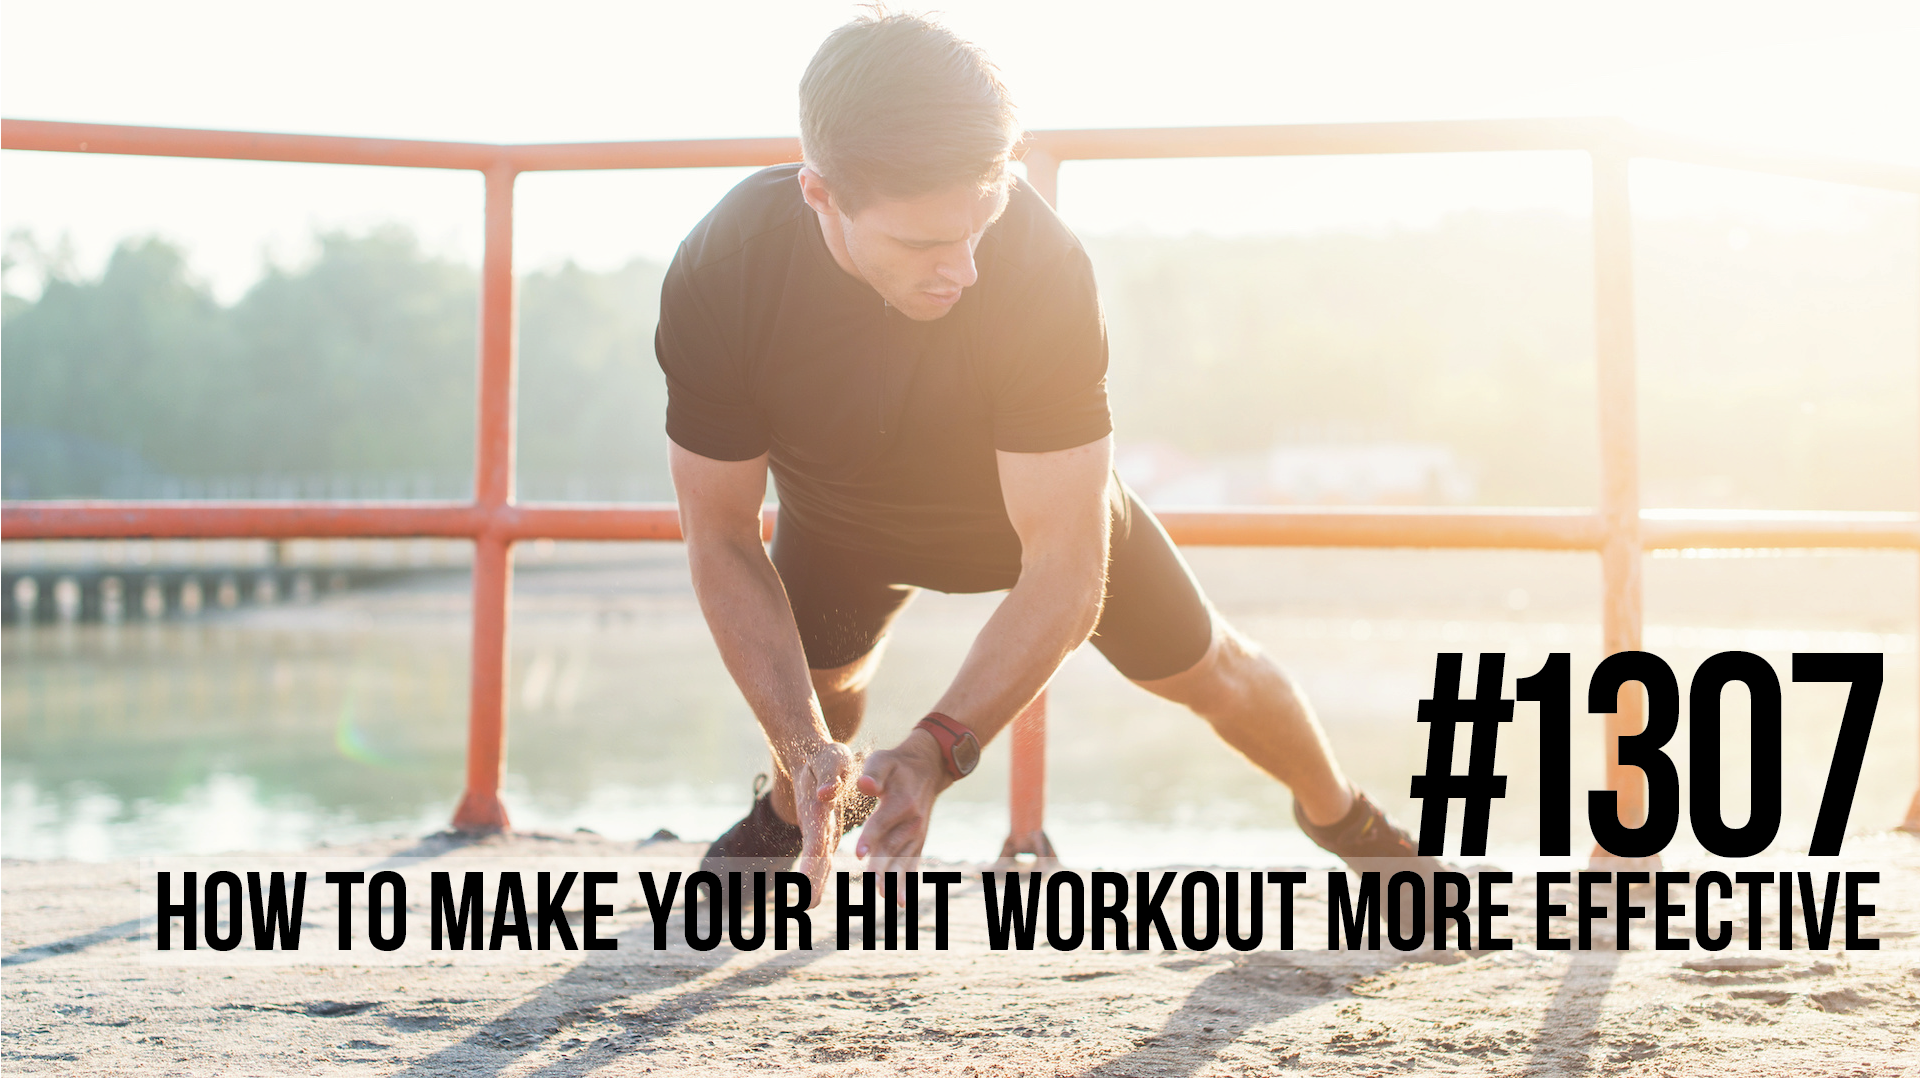 1307: How to Make Your HIIT Workout More Effective